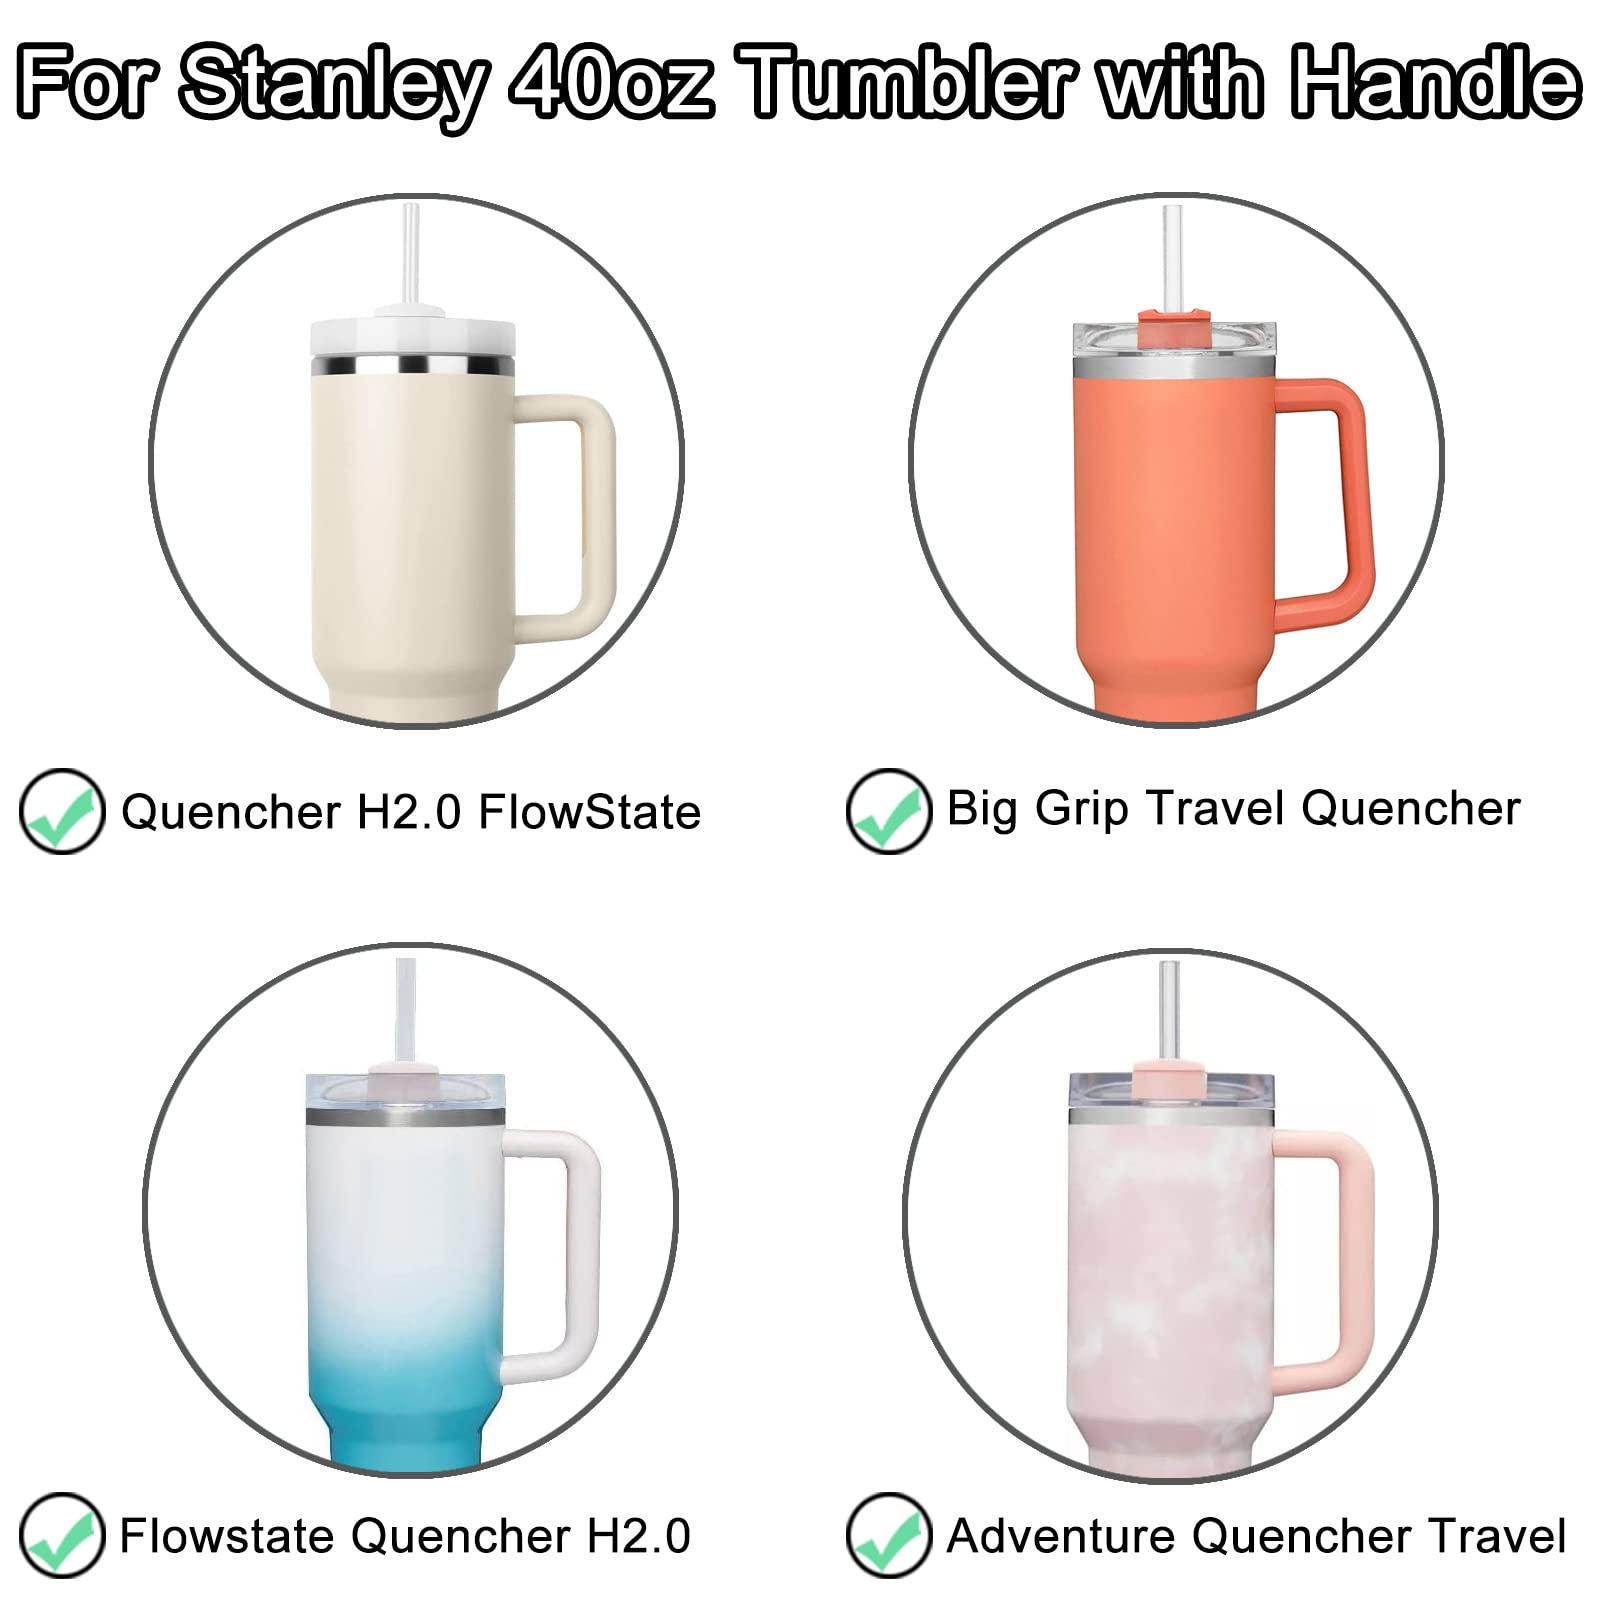 Tumbler Lids for Stanley Cup, 2 Pack Replacement Lids Fit Stanley Quencher 40oz Tumbler with Handle, Spill Proof Tumbler Cover for Stanley Cup Accessories. (Grey-2.0 Version)